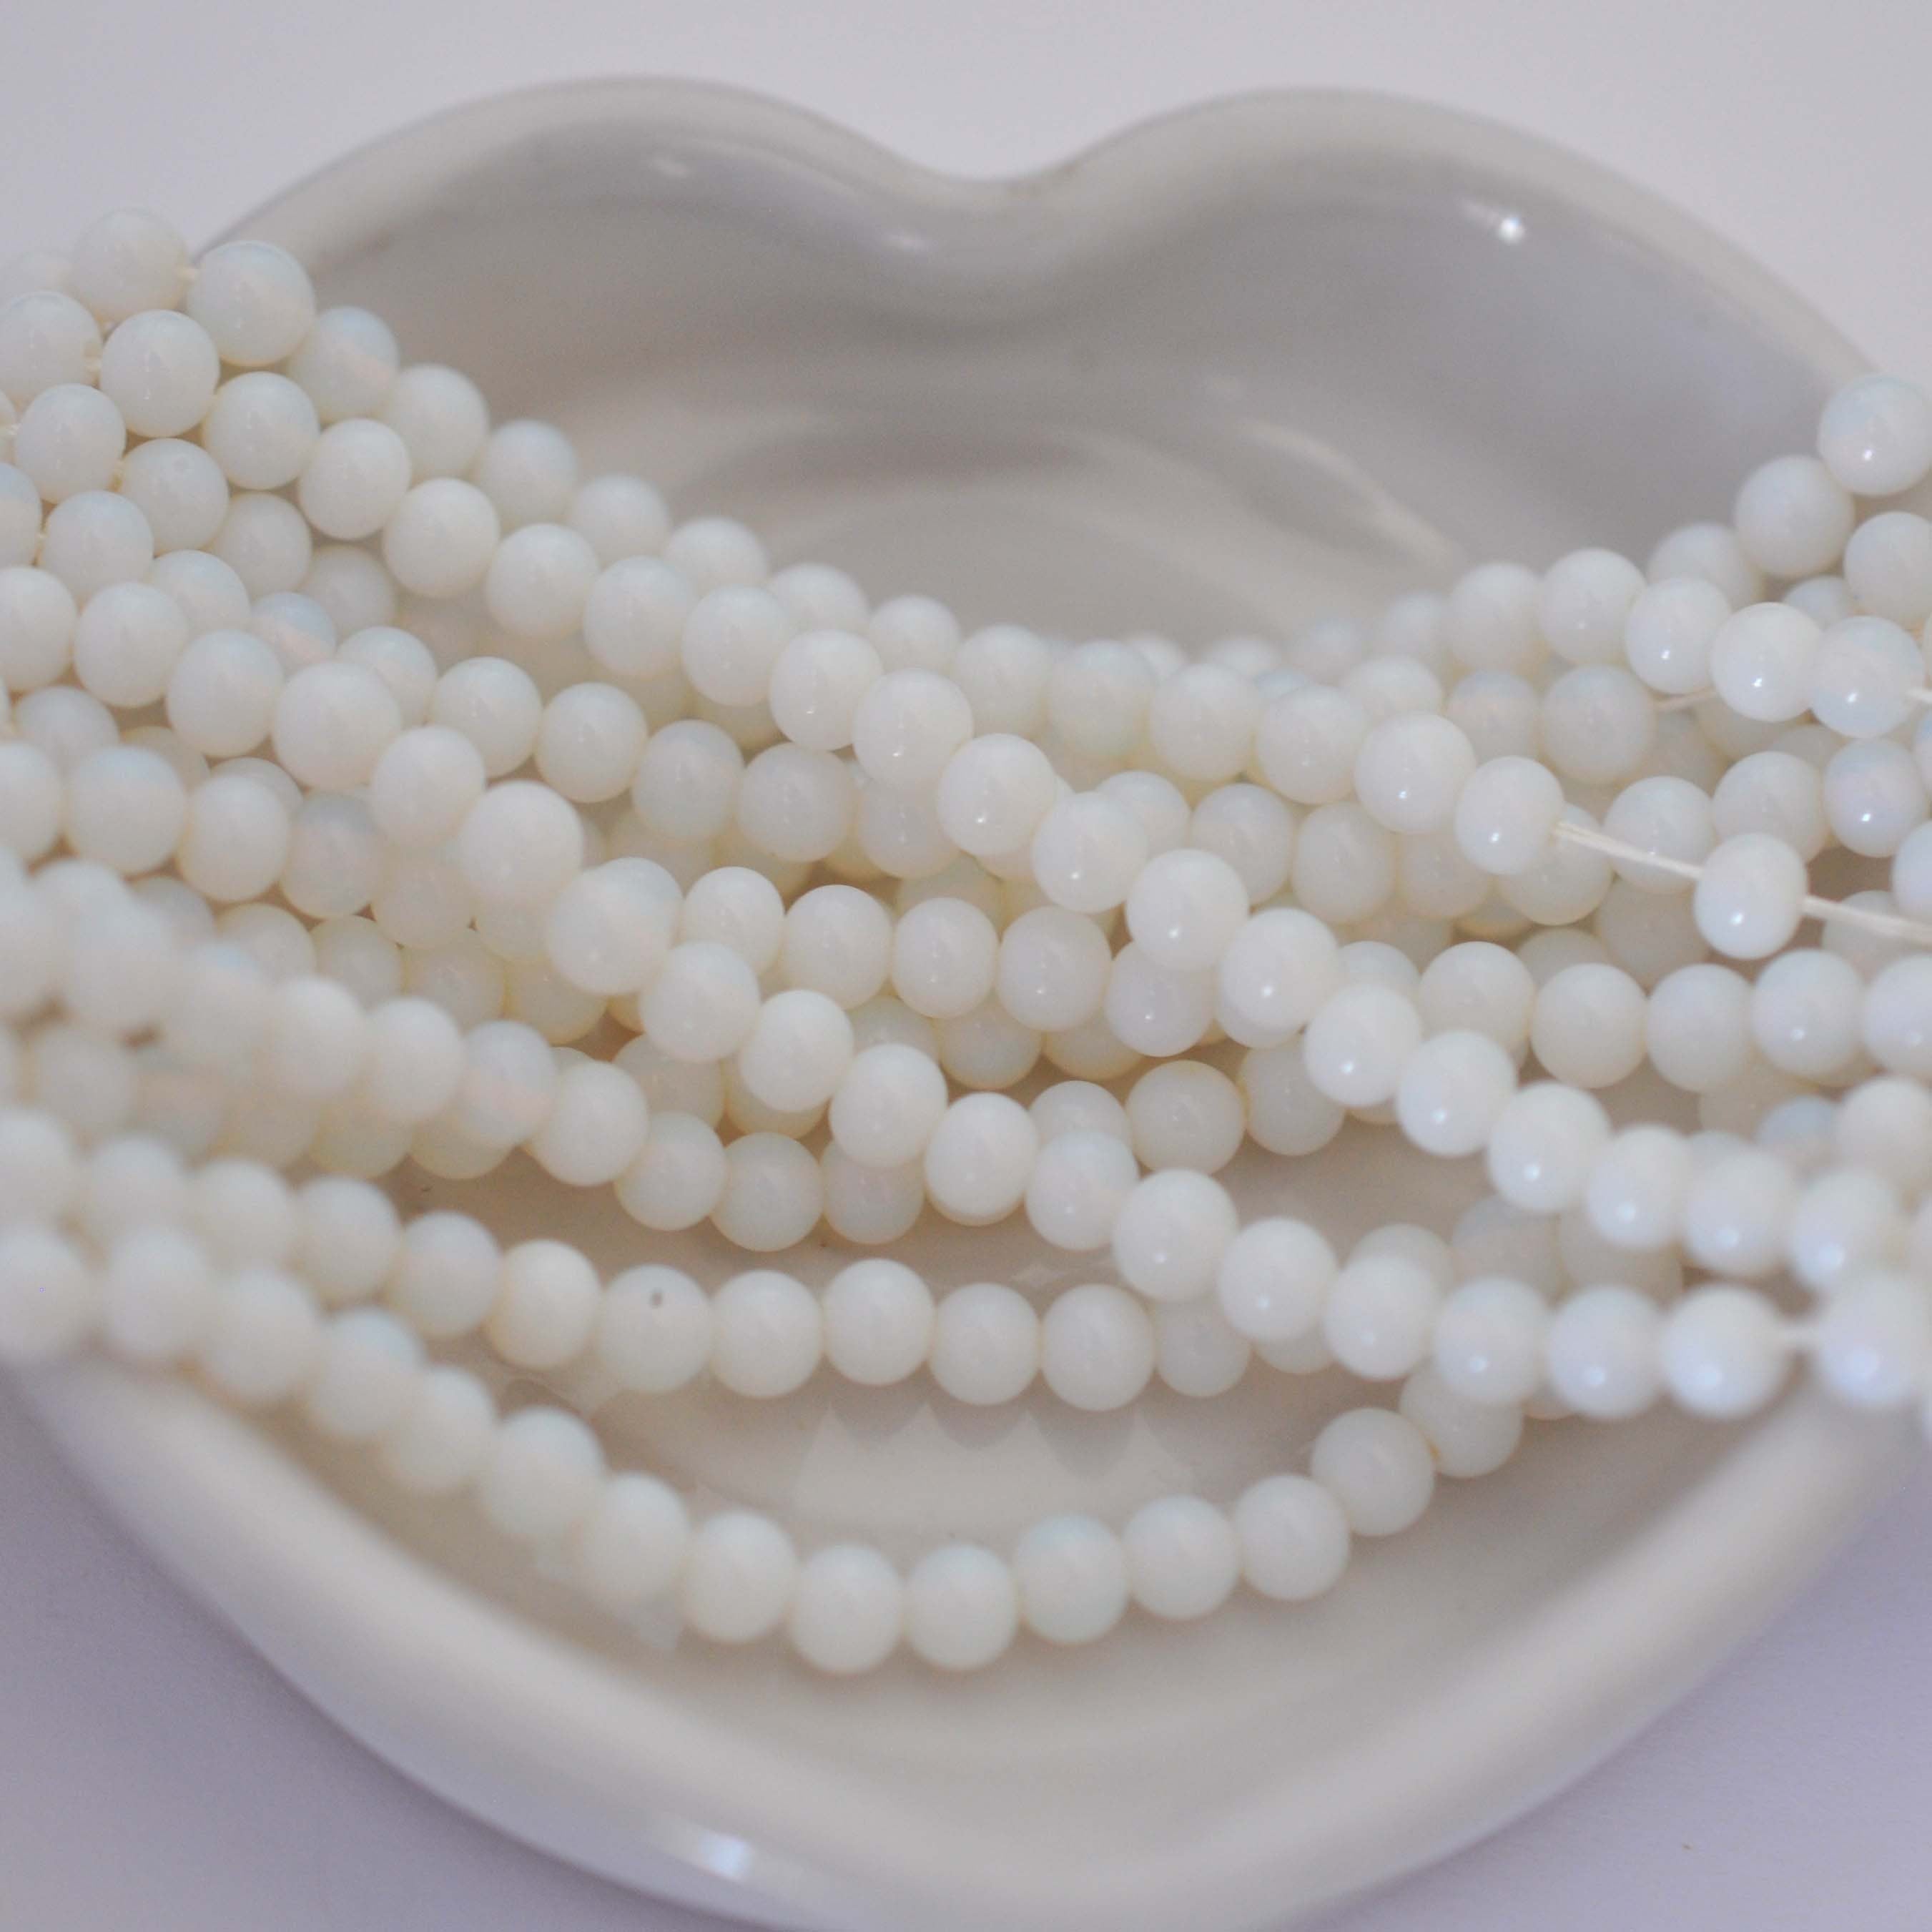 White Opal 4MM Round Glass Beads Vintage Cherry Brand - 100 Beads